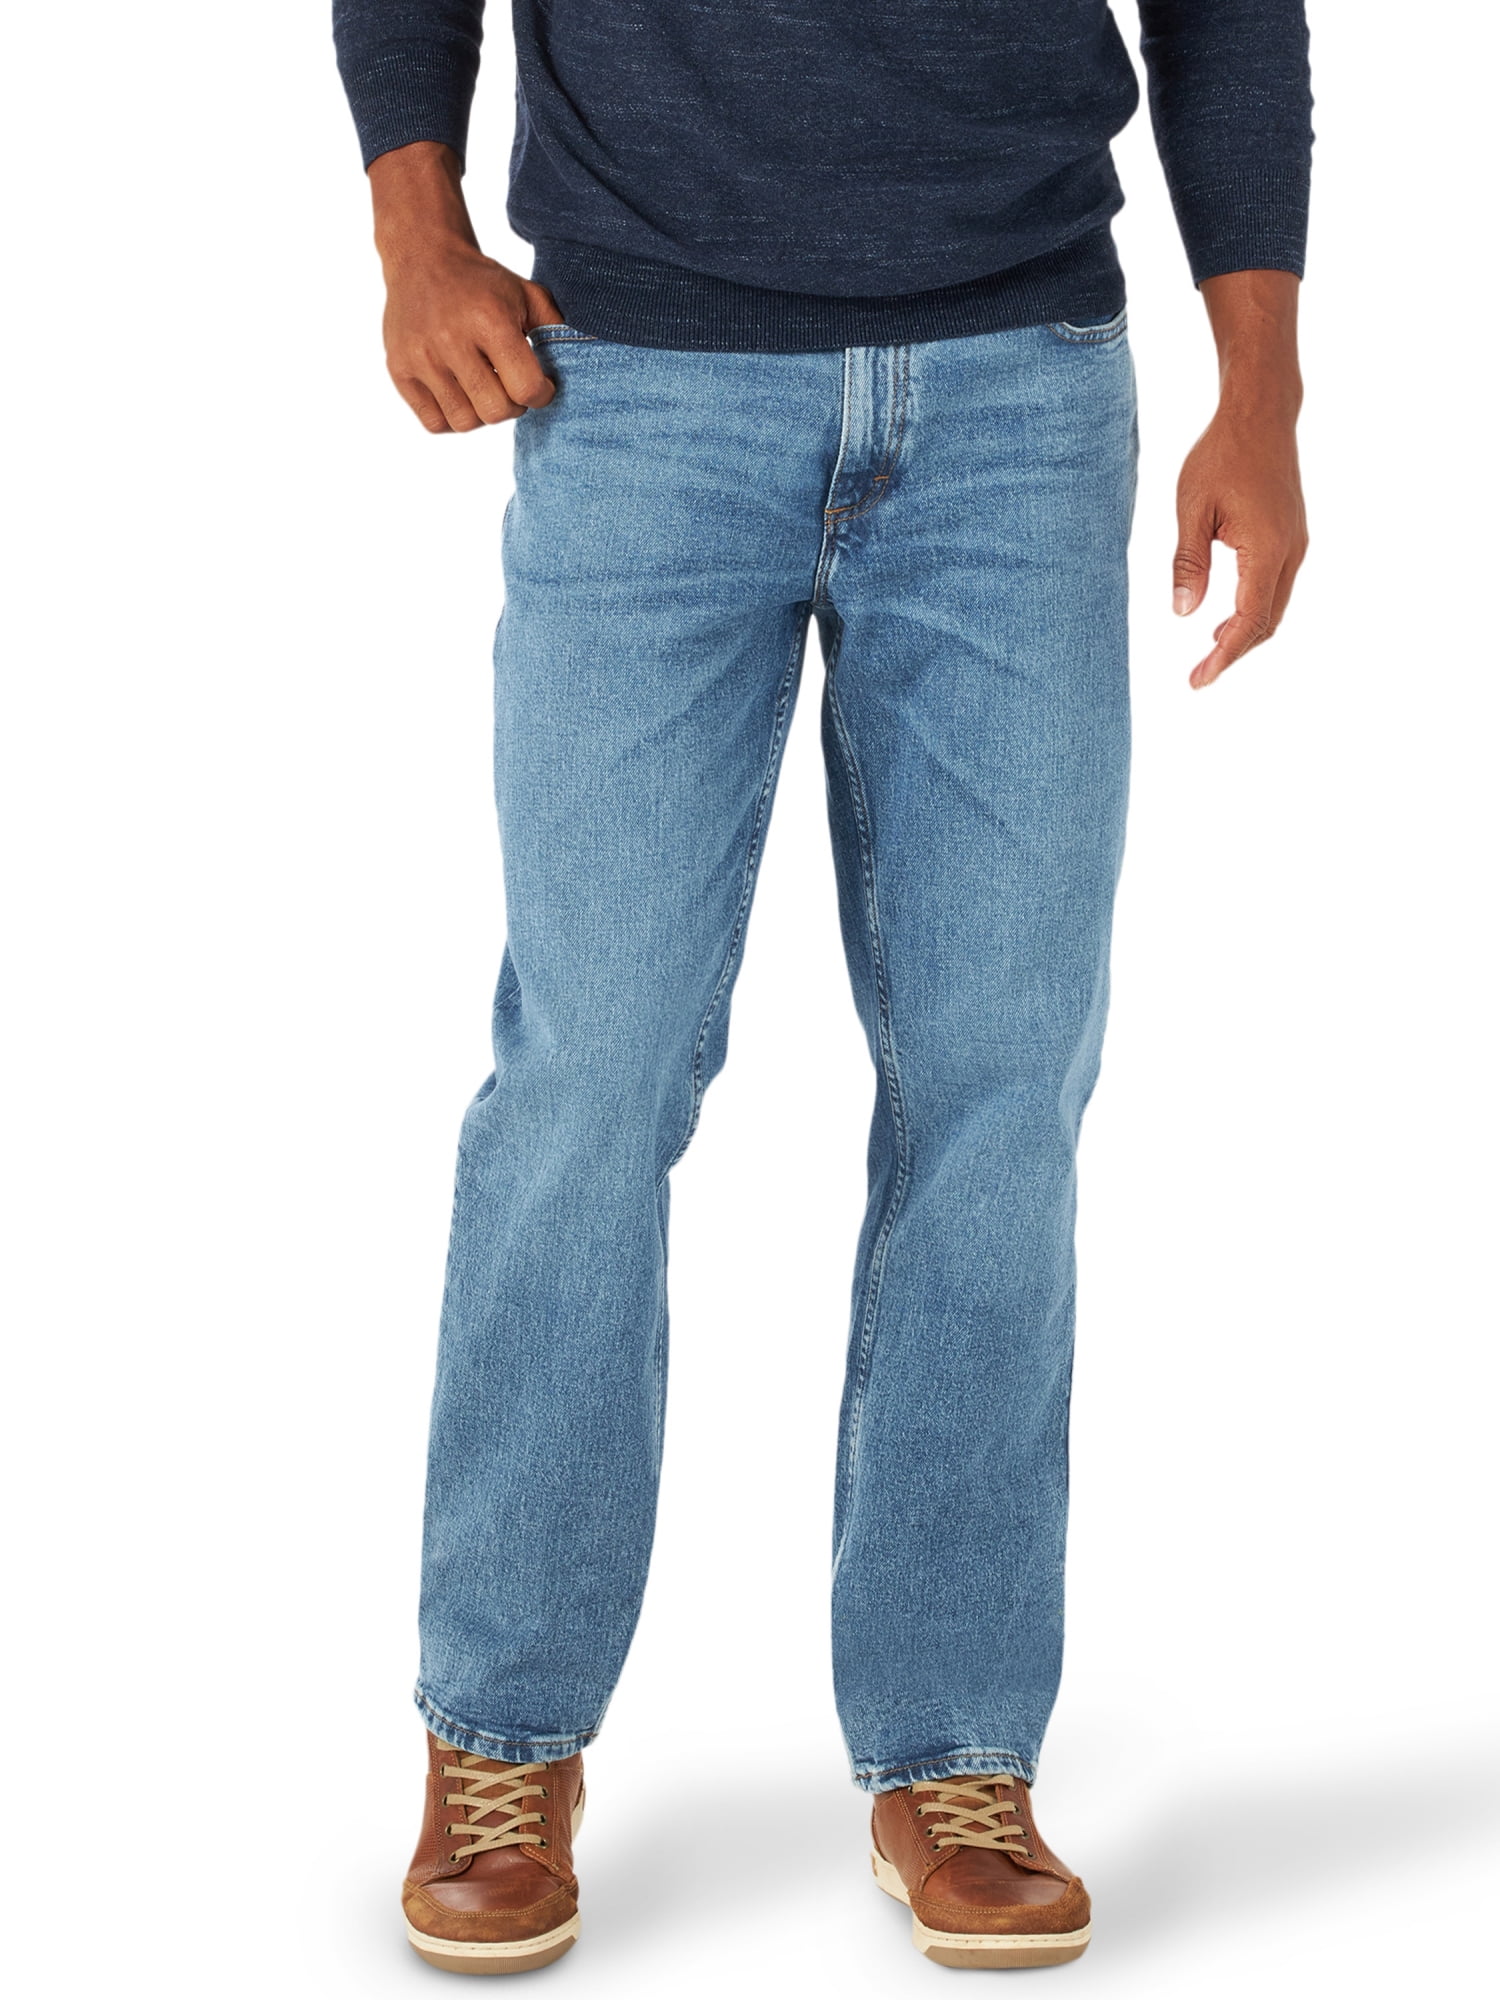 Lee Men's Relaxed Fit Straight Leg Jeans